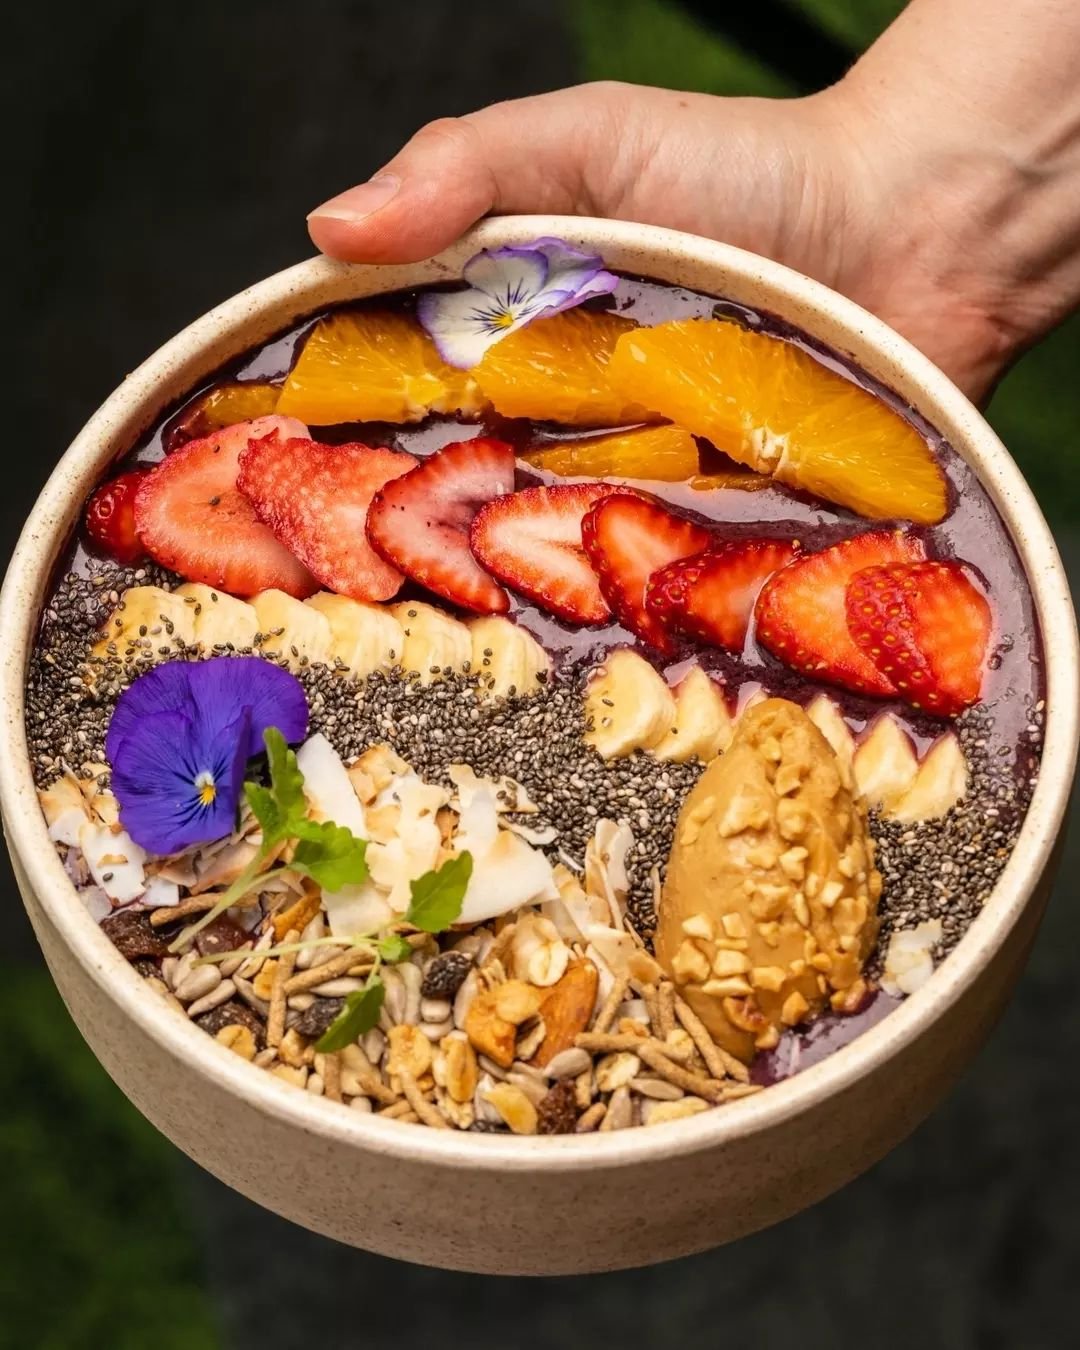 🔍 A clue as to why our Acai Bowl is anything but a basic smoothie bowl: we give you the option to add Biscoff or Nutella (or both!). Who's ready to sweeten up their weekend? 🥣